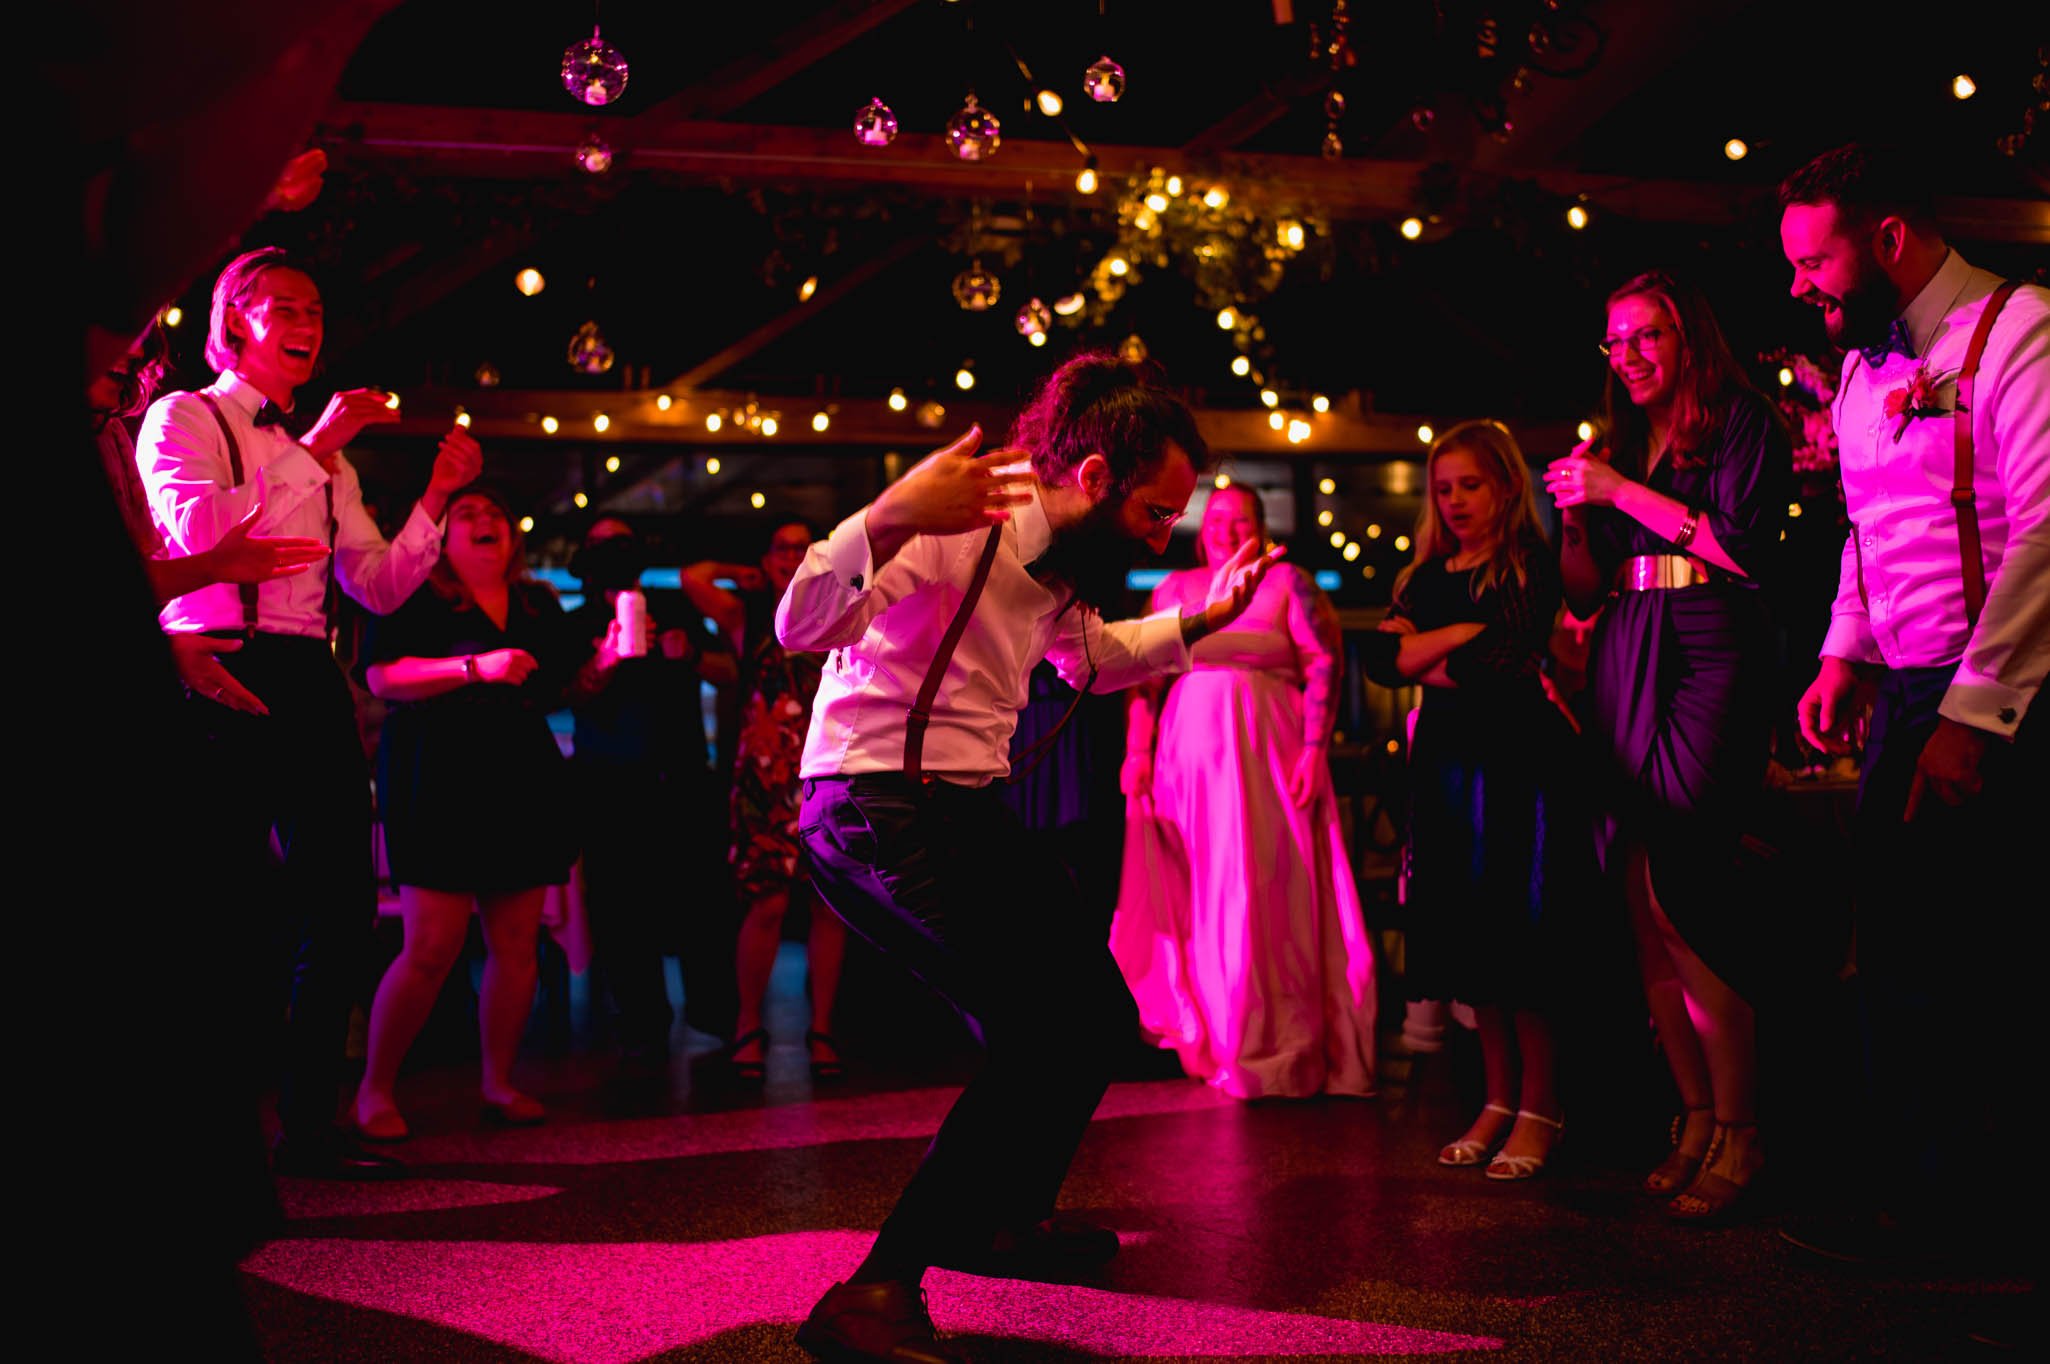 a wedding party guest dances hard during the wedding reception